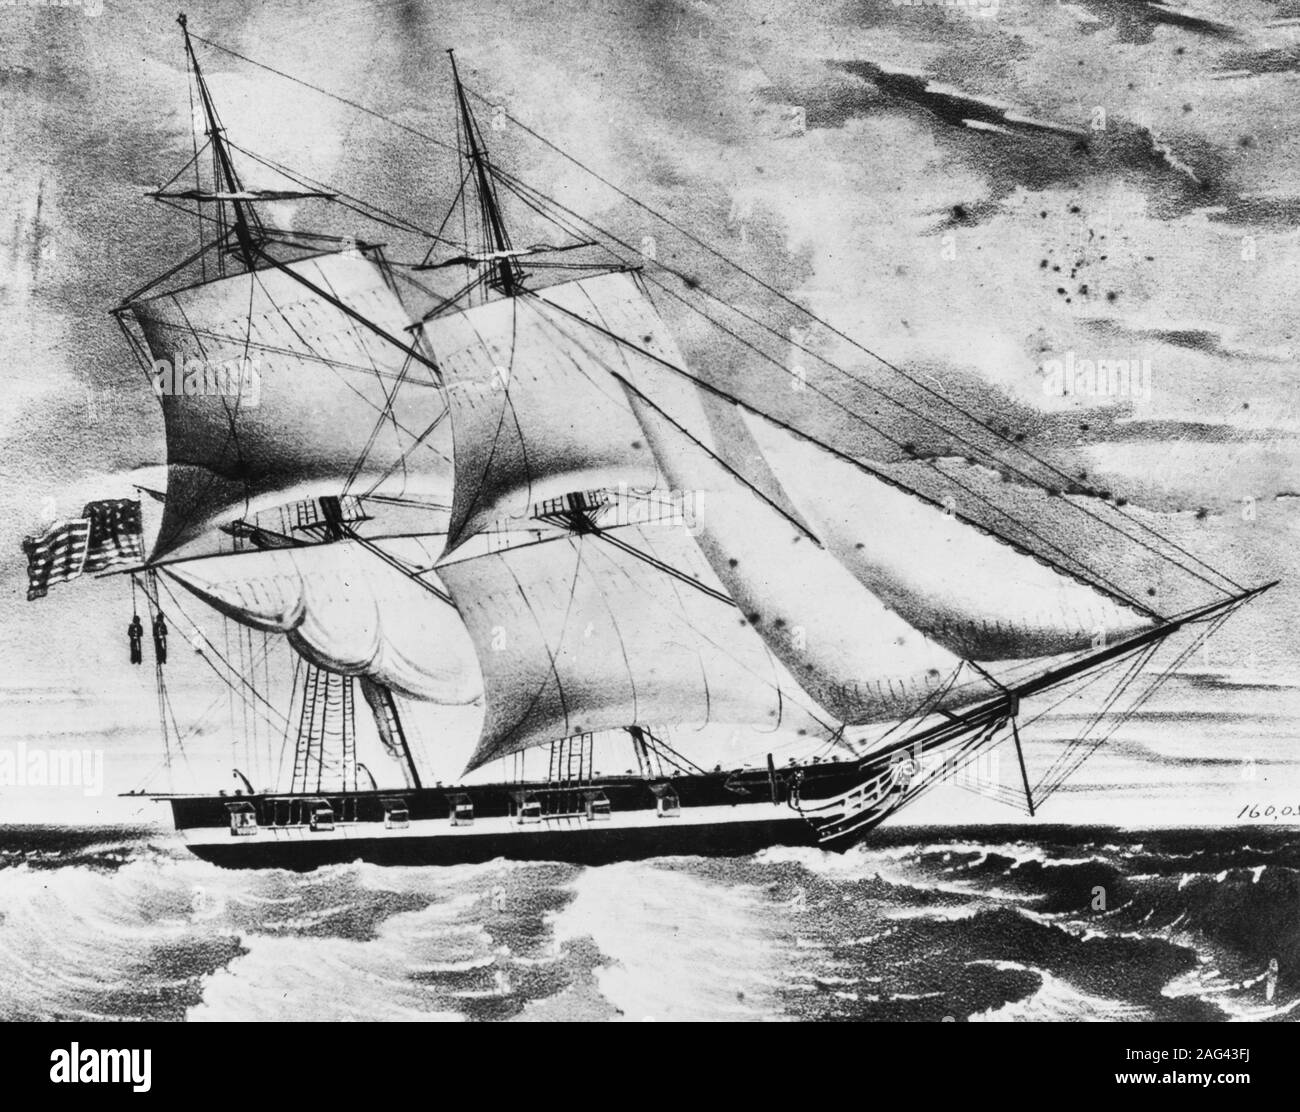 Lithograph, published circa 1843, depicting Somers under sail, bound home from the African coast on 1 December 1842, after the hanging of three alleged mutineers. The men executed were: Midshipman Philip Spencer, Boatswain's Mate Samuel Cromwell and Seaman Elisha Small. The print shows two of them hanging from the yardarm. Stock Photo